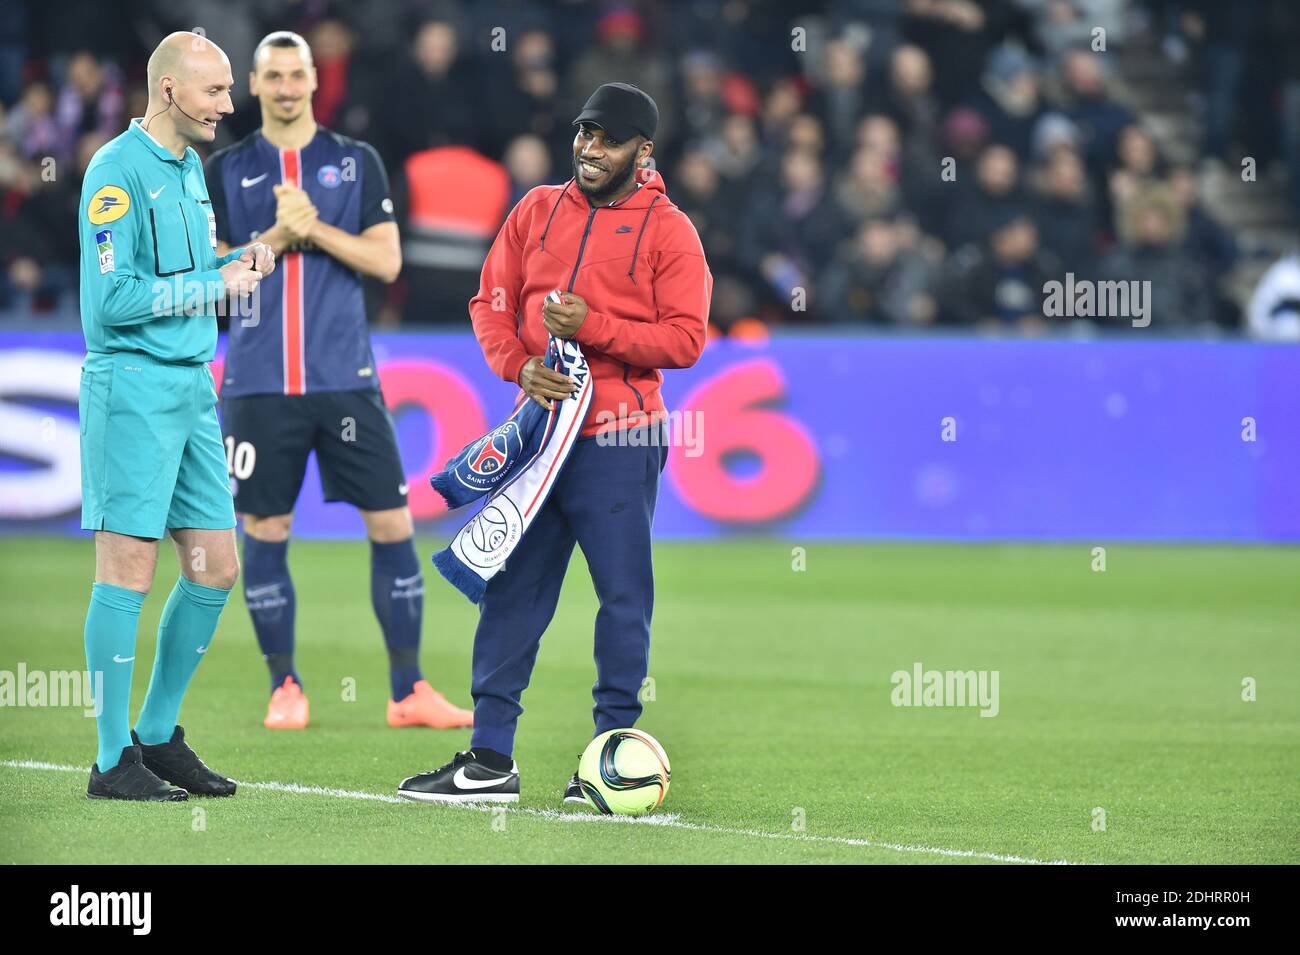 Jay Jay Okocha Had Been Played In Psg Between The Years1998 02 Gestures After He Made The Start Kick During The French L1 Football Match Between Paris Saint Germain And Monaco At